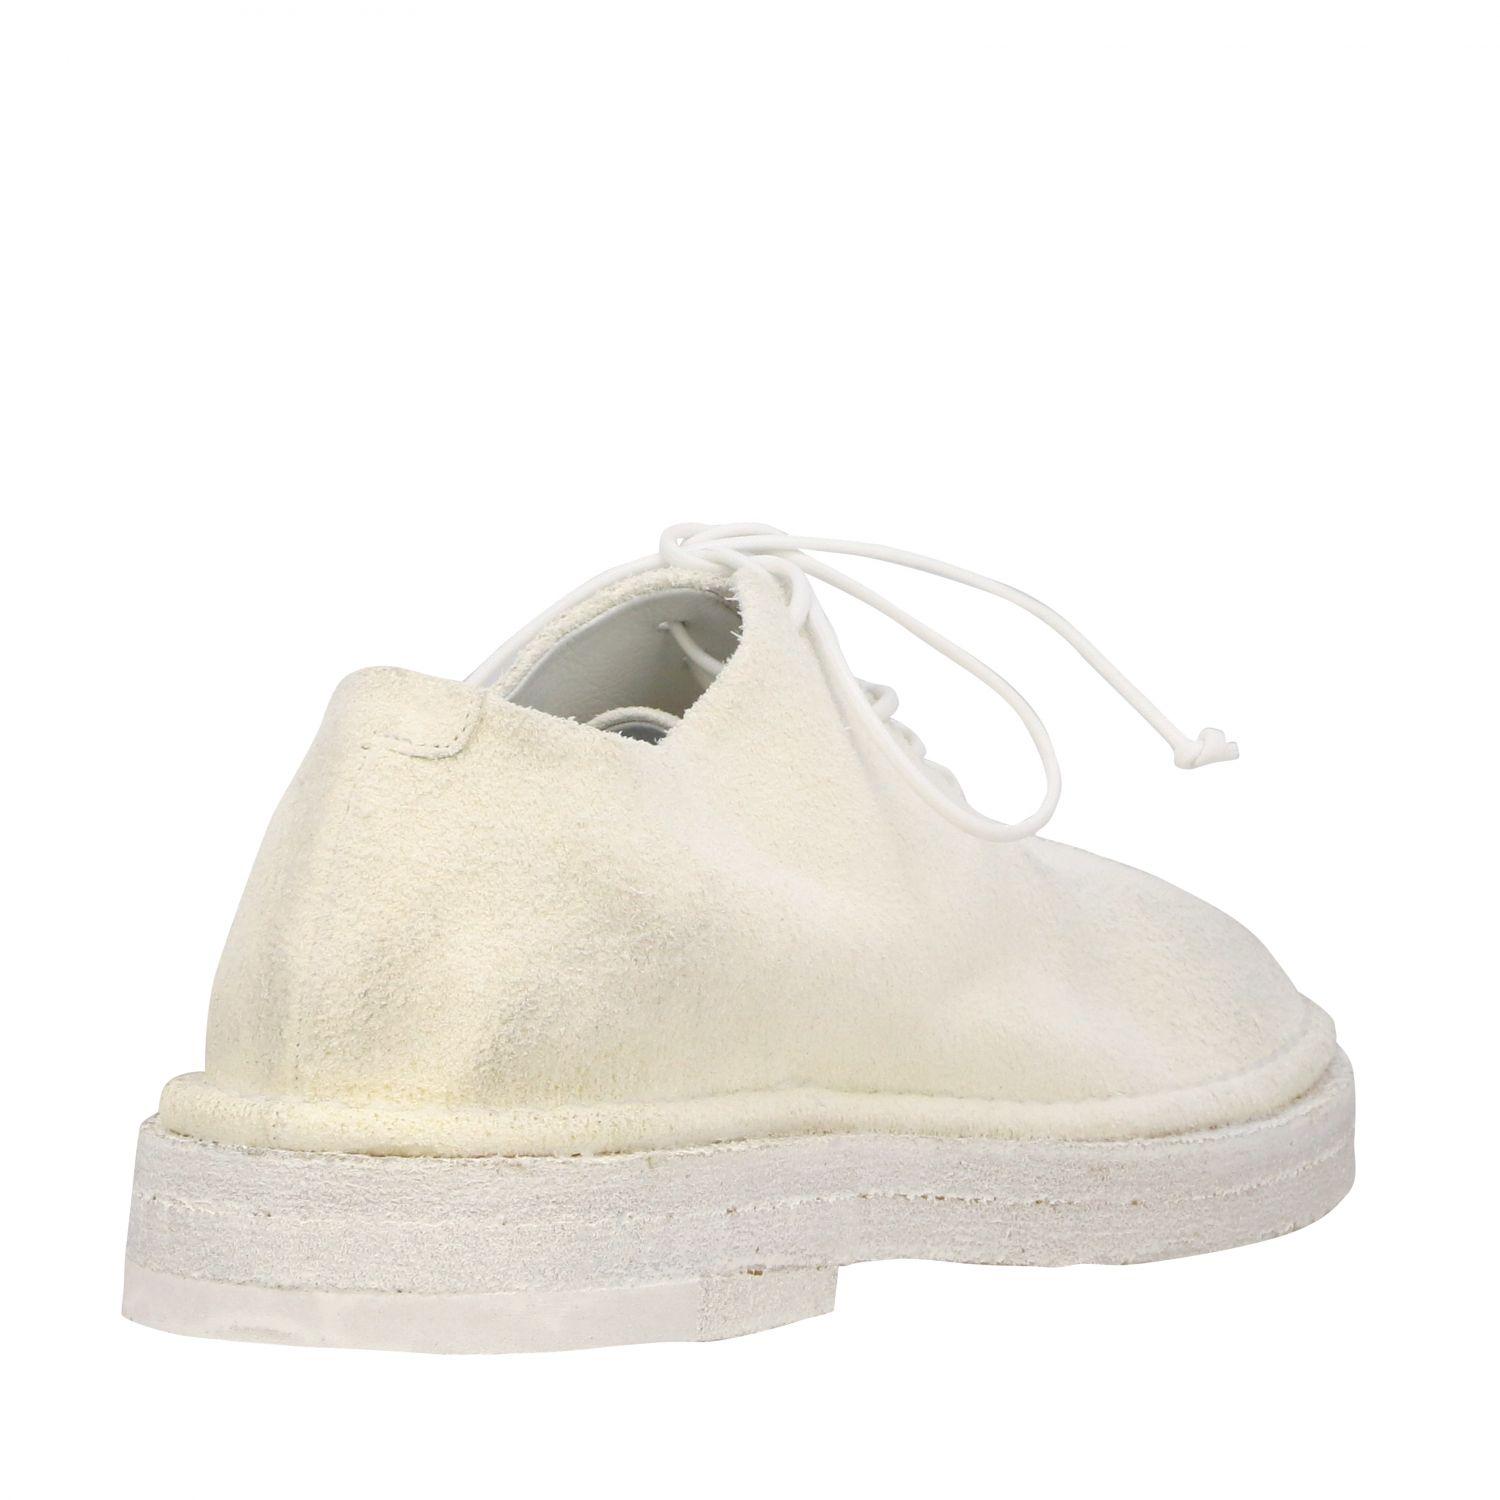 Marsèll Leather Sancrispa Laced Shoe In Suede in White for Men - Lyst